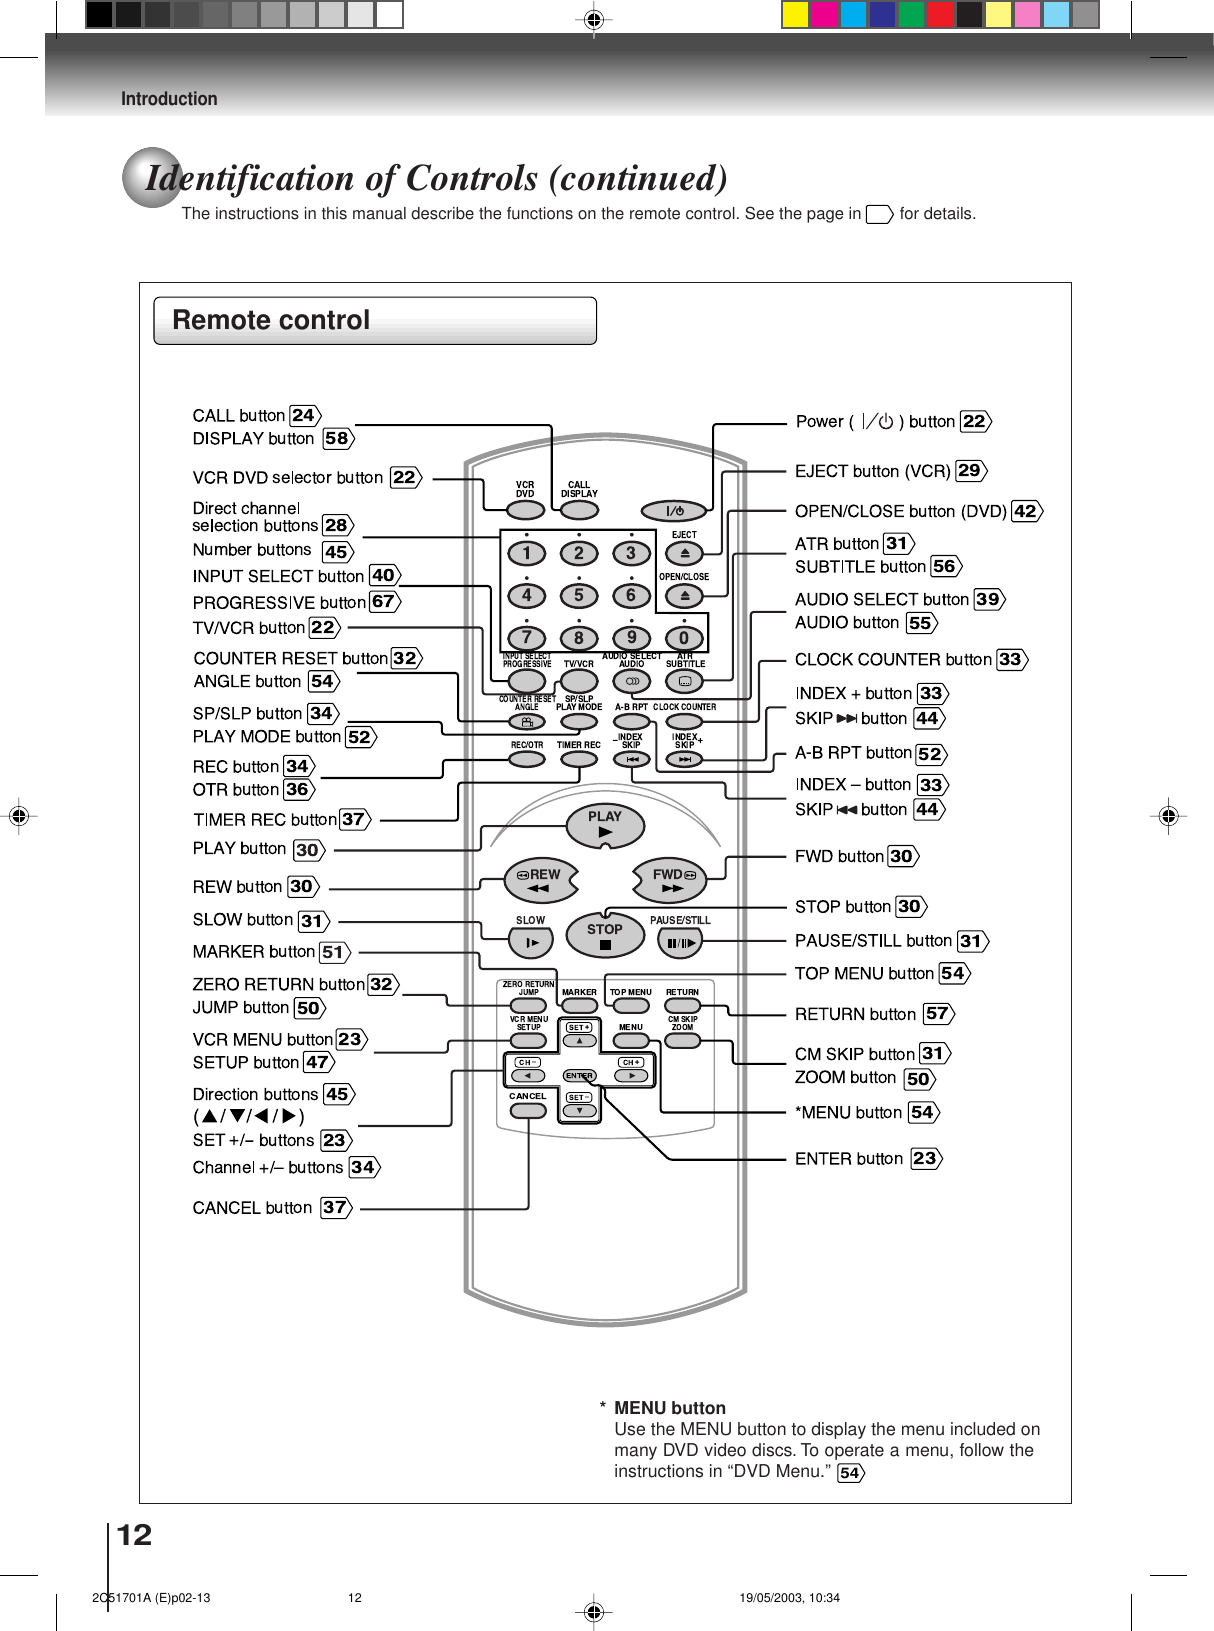 12IntroductionRemote control* MENU buttonUse the MENU button to display the menu included onmany DVD video discs. To operate a menu, follow theinstructions in “DVD Menu.” 54Identification of Controls (continued)The instructions in this manual describe the functions on the remote control. See the page in   for details.  2C51701A (E)p02-13 19/05/2003, 10:3412